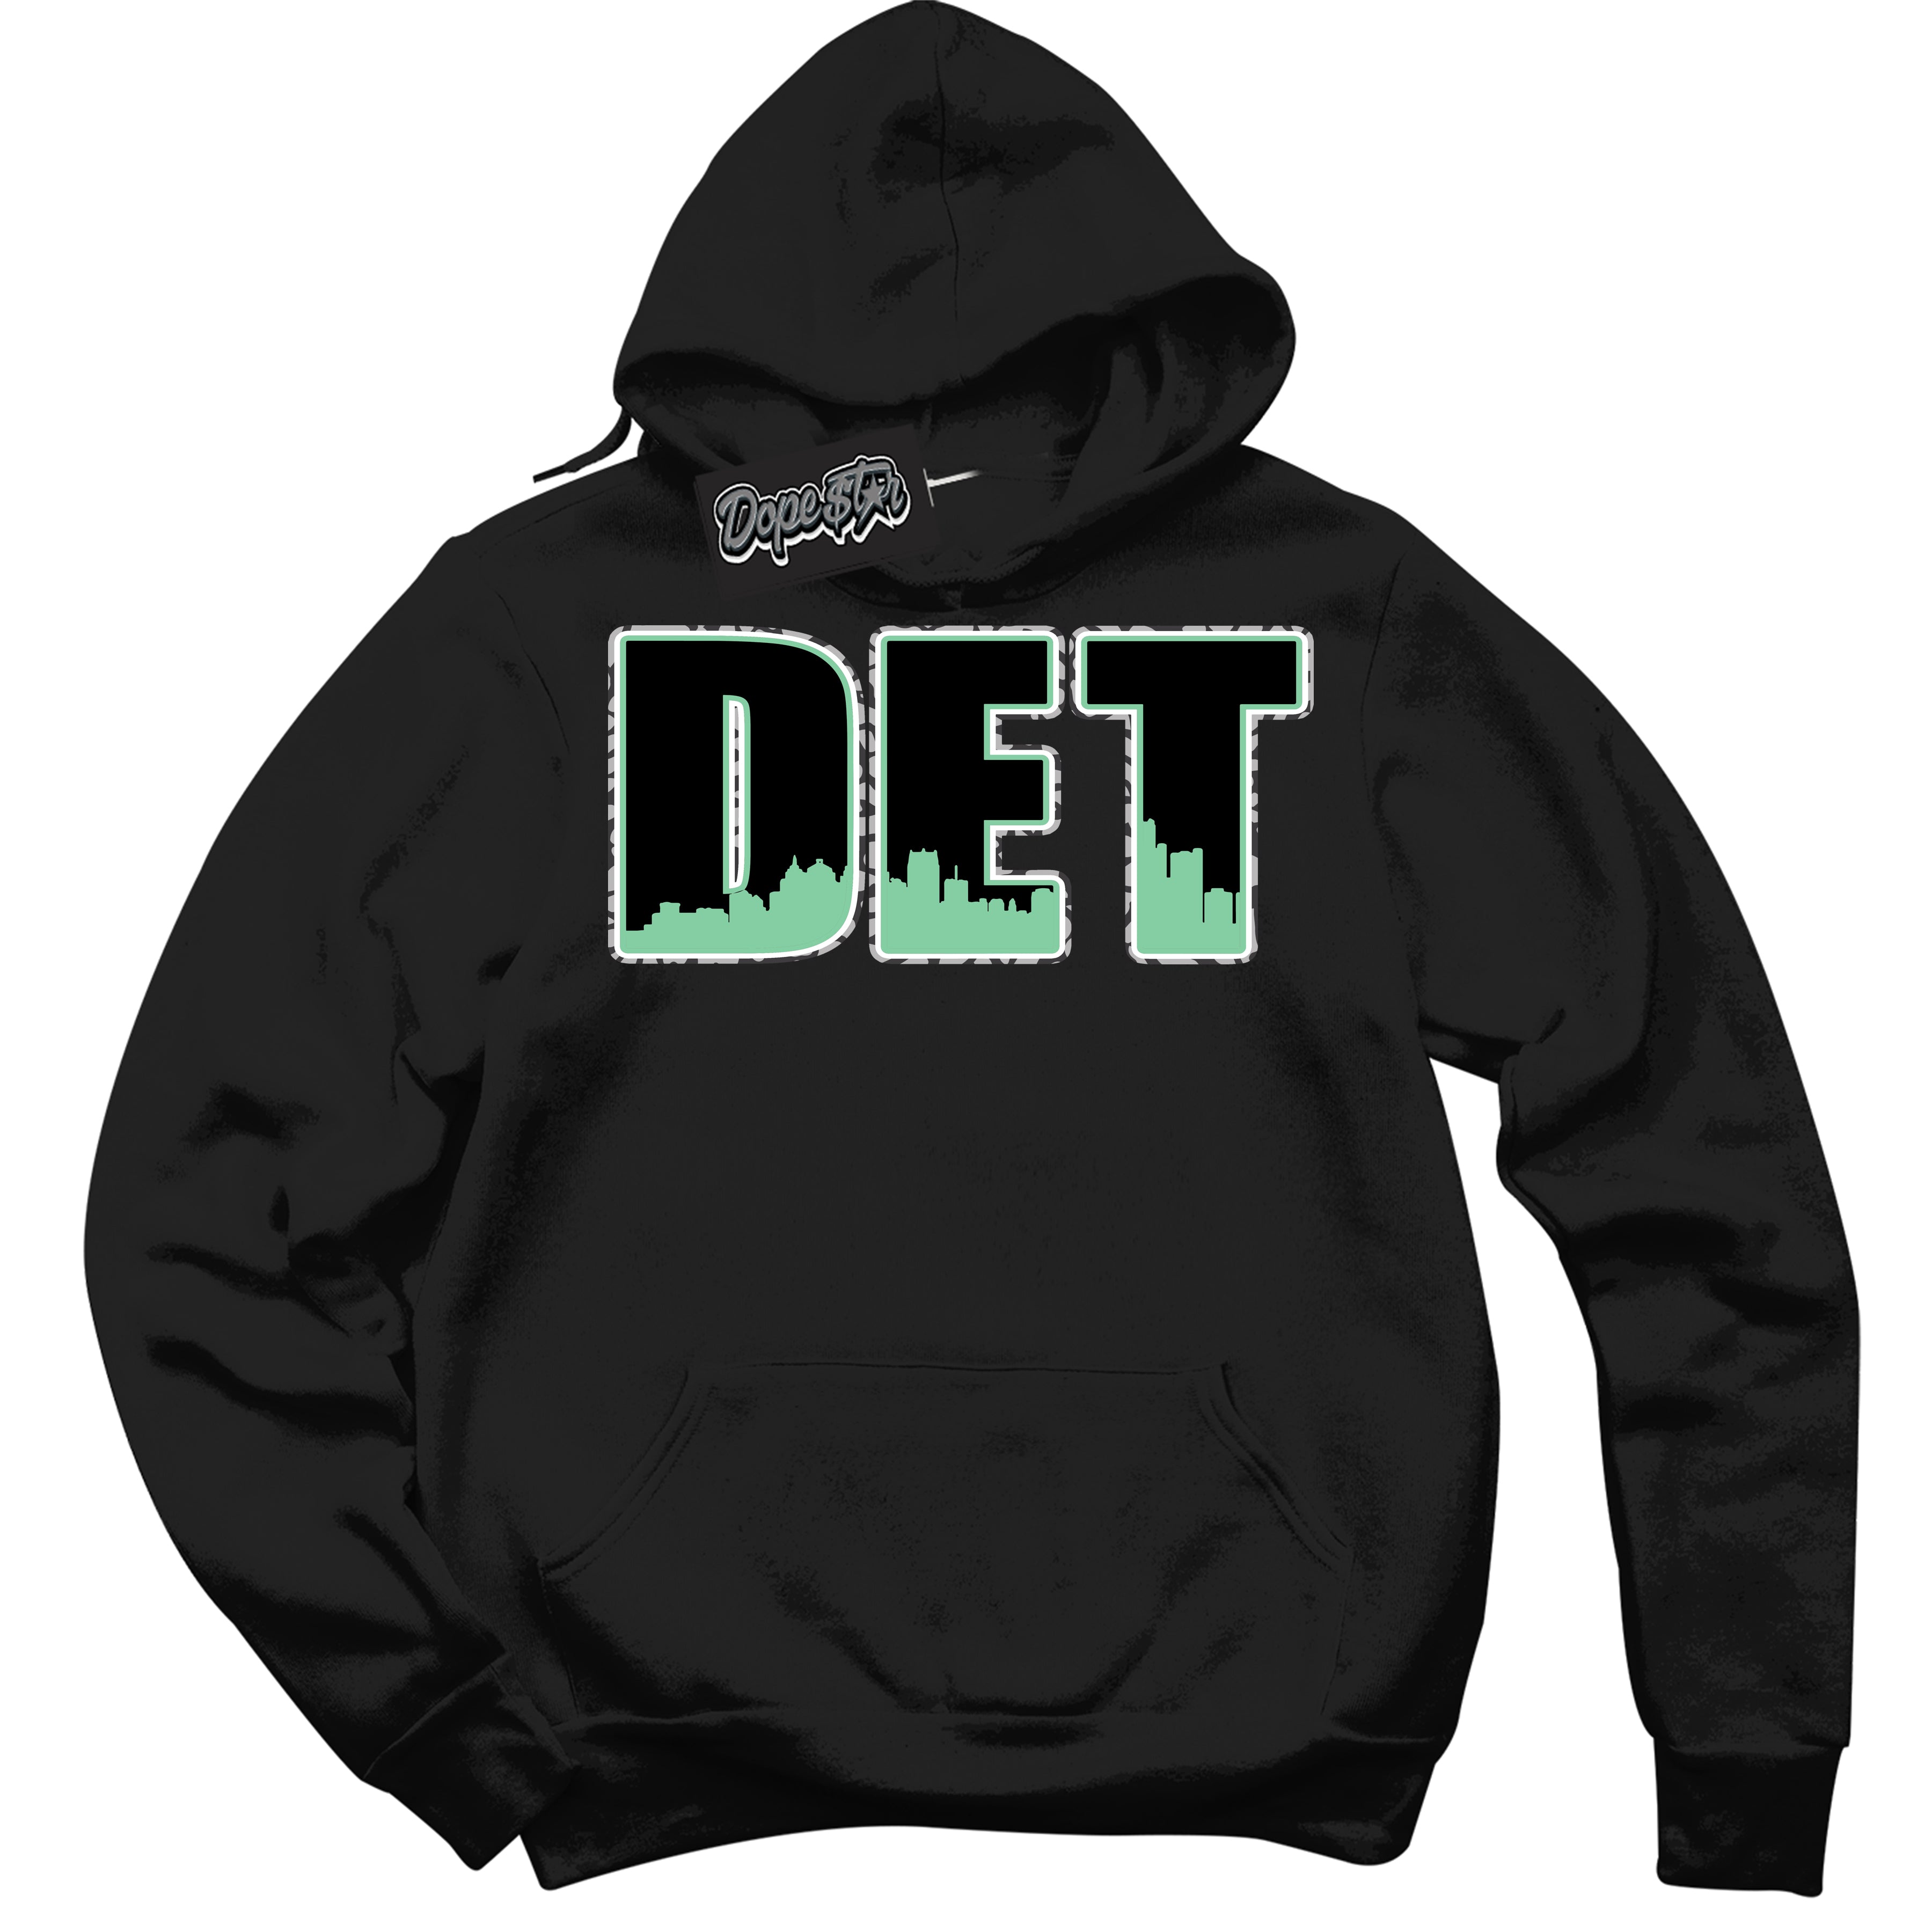 Cool Black Graphic DopeStar Hoodie with “ Detroit “ print, that perfectly matches Green Glow 3S sneakers